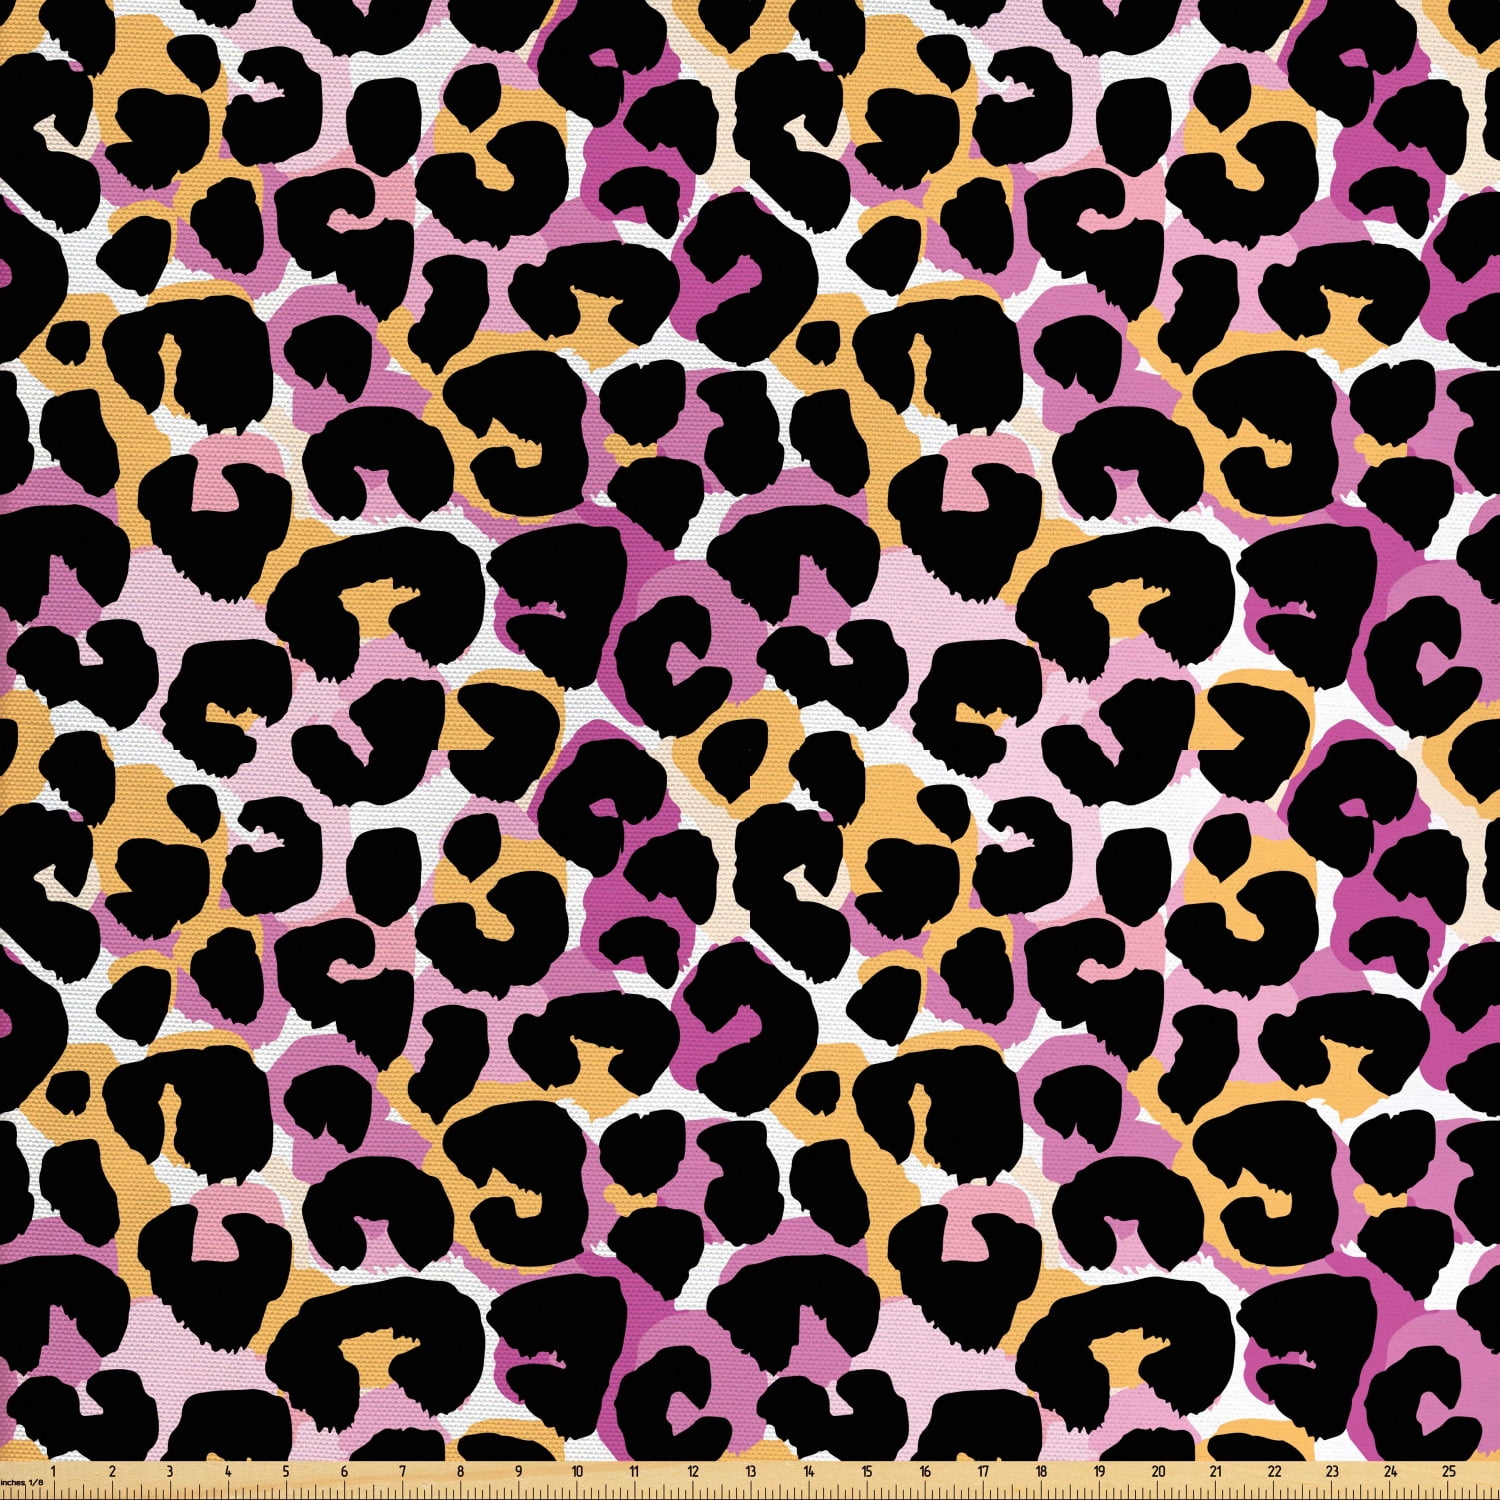 leopard-print-fabric-by-the-yard-abstract-wild-exotic-animal-skin